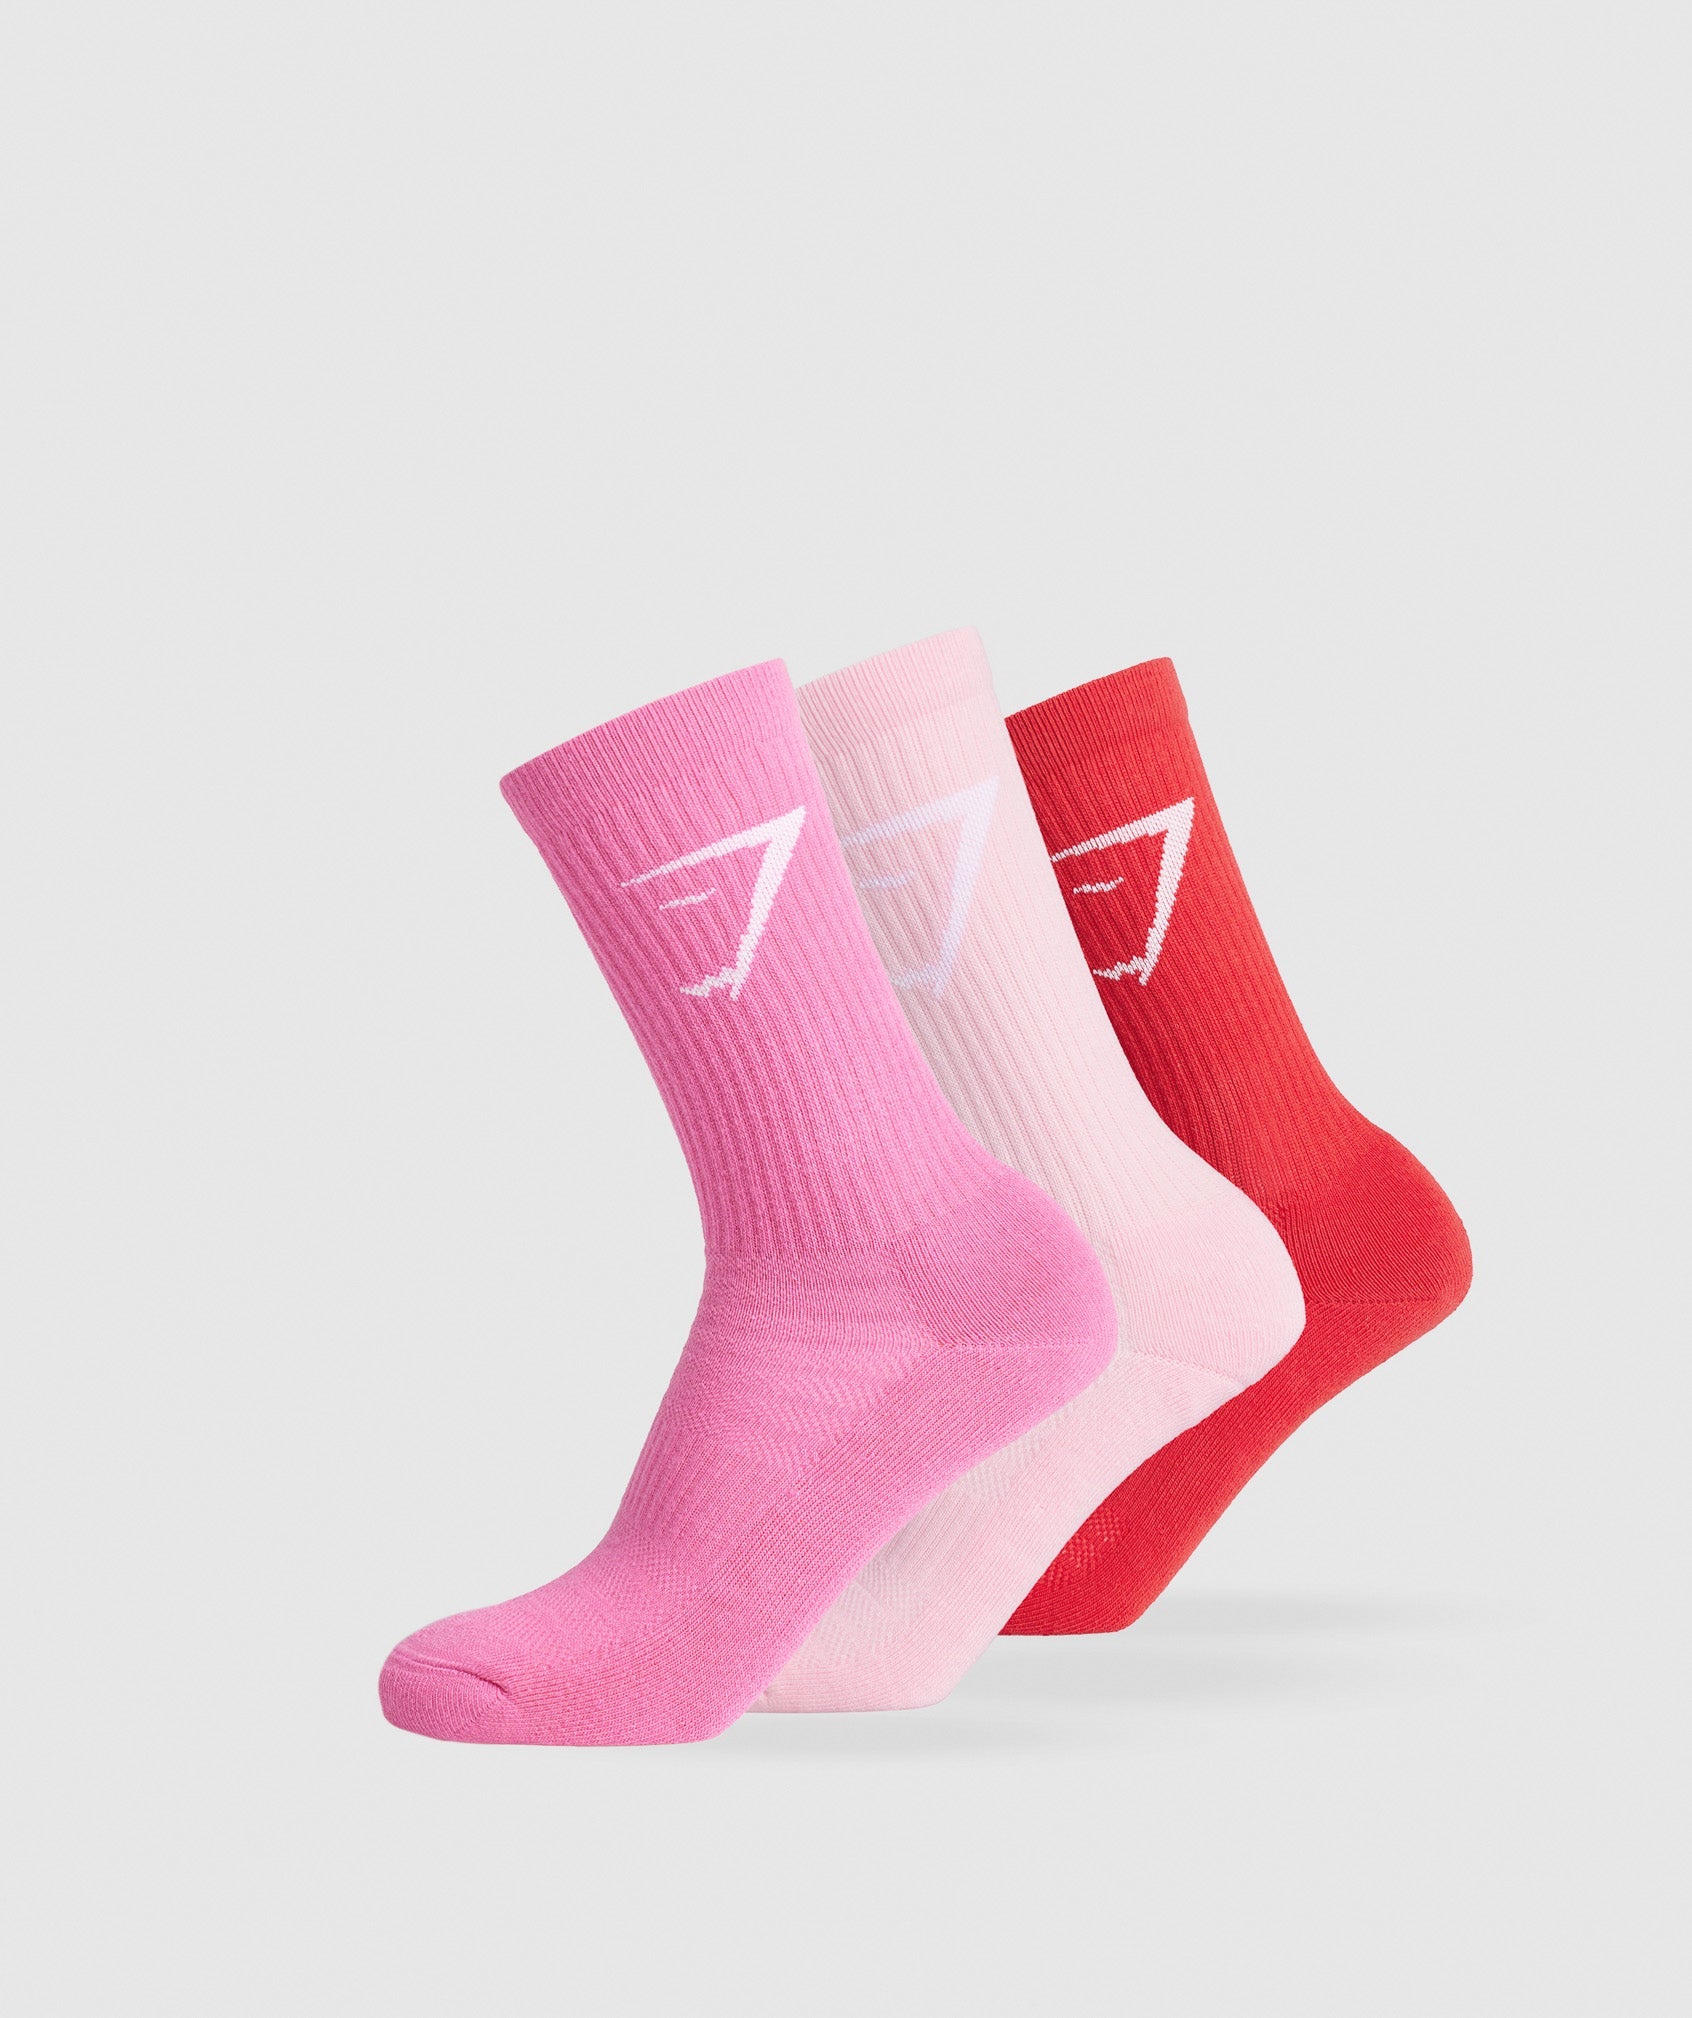 Crew Socks 3pk in Dolly Pink/Fetch Pink/Jamz Red - view 1